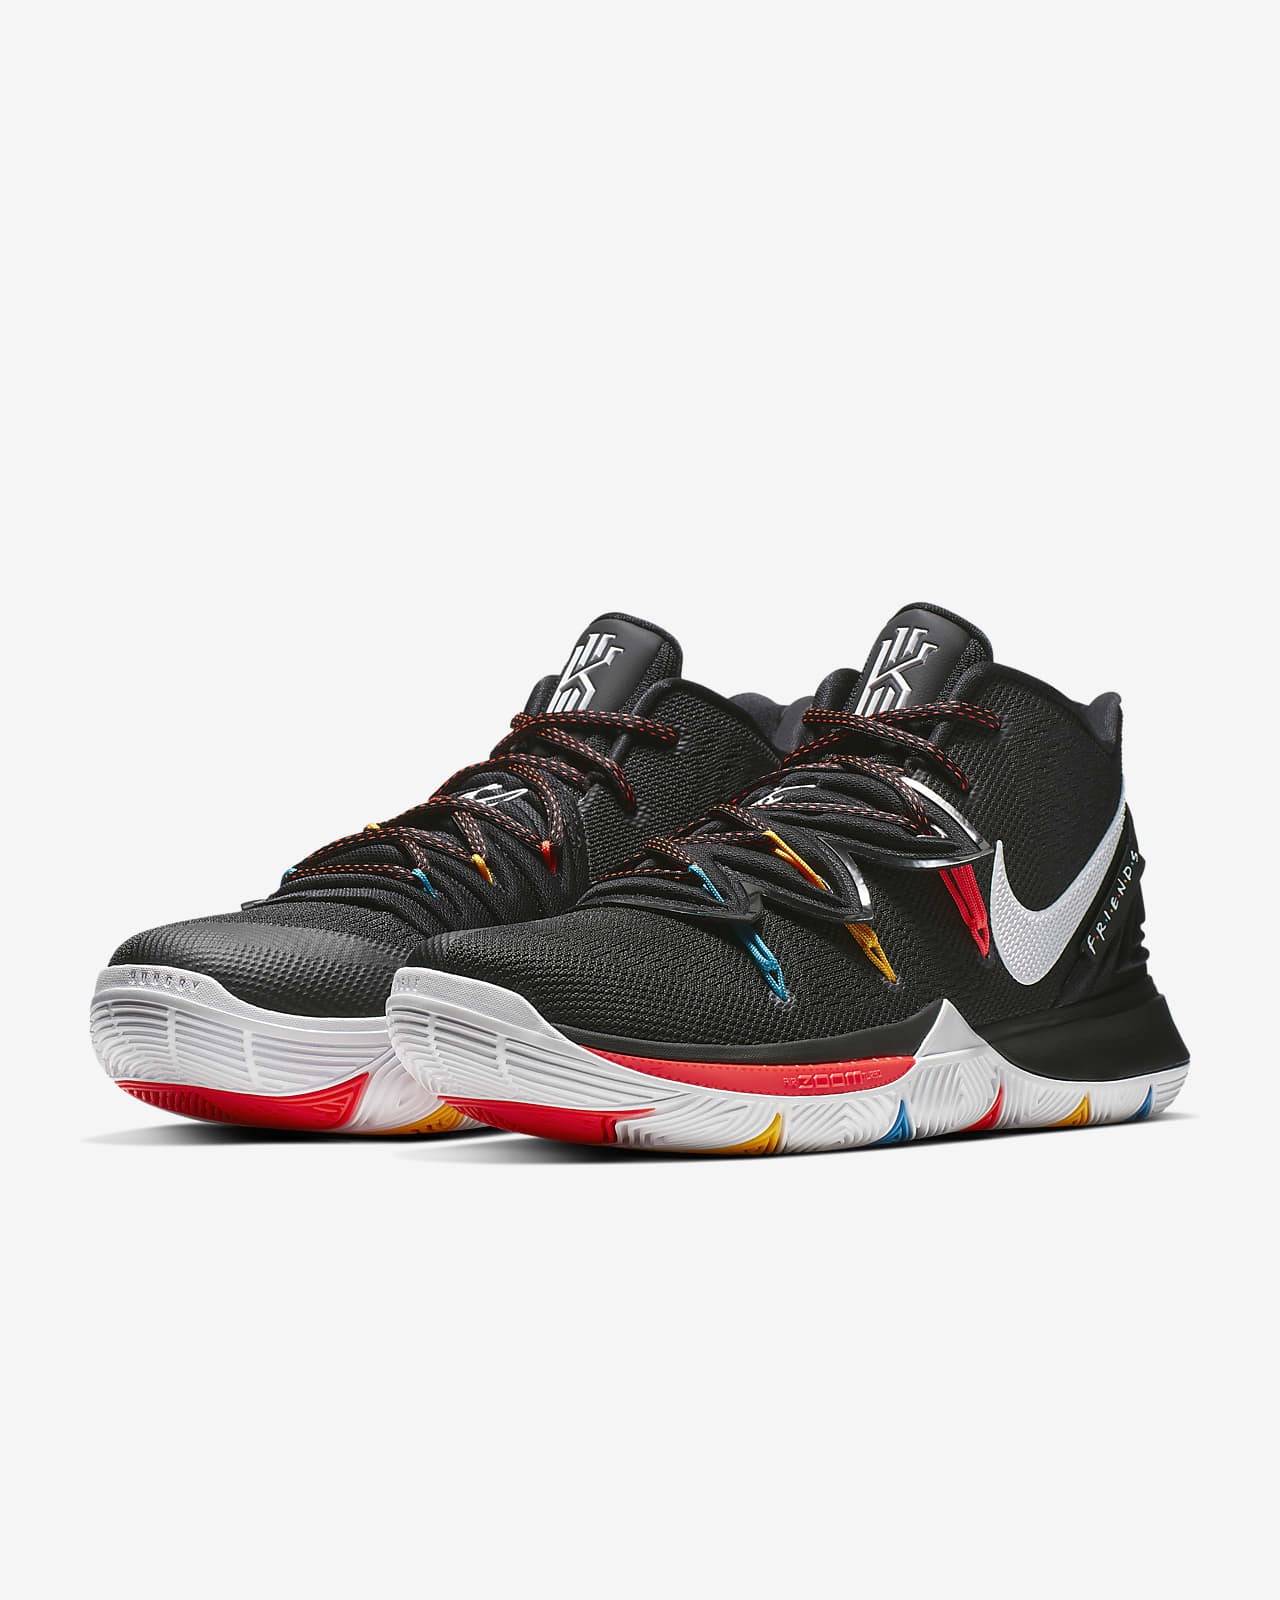 Nike Basketball Shoes Kyrie 5 EP Men 's Sports Shoes Basketball Shoes Yahoo Shopping Center